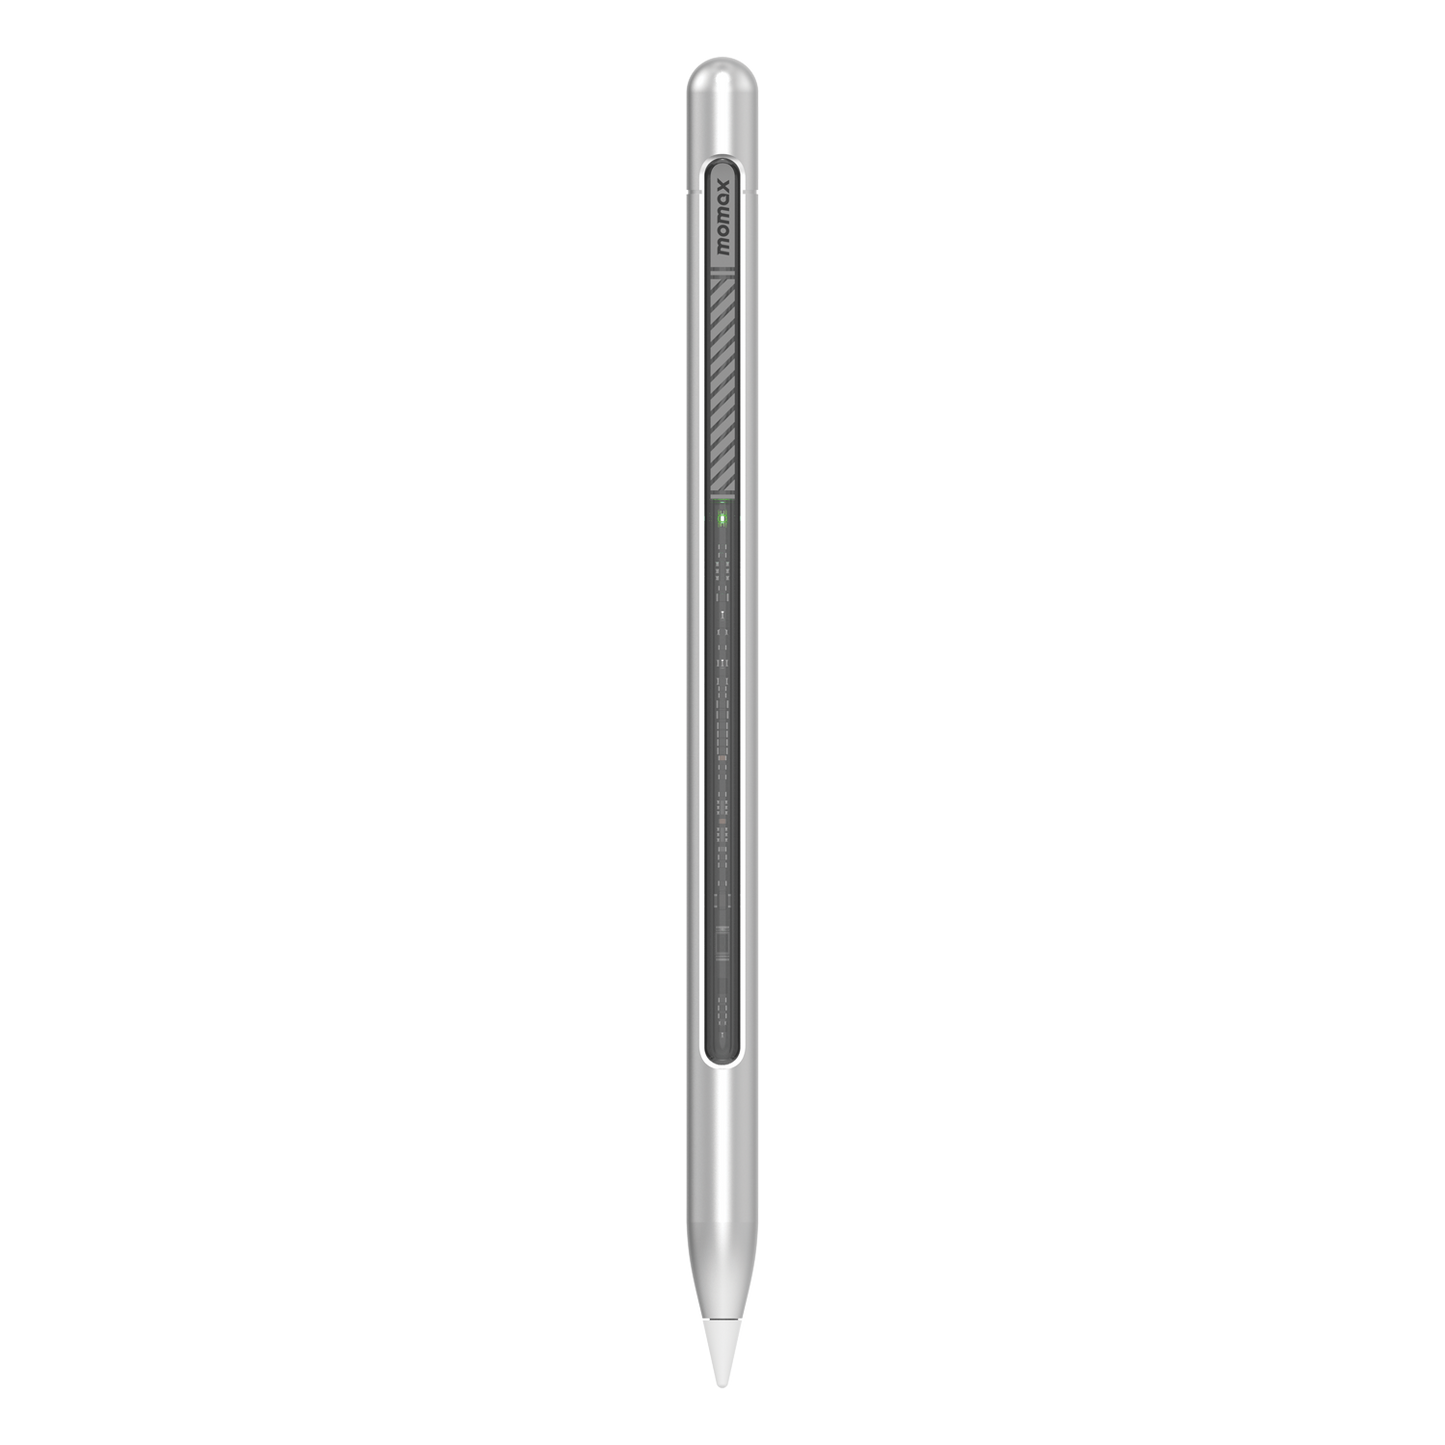 Mag.Link Magnetic charging active stylus pen TP9